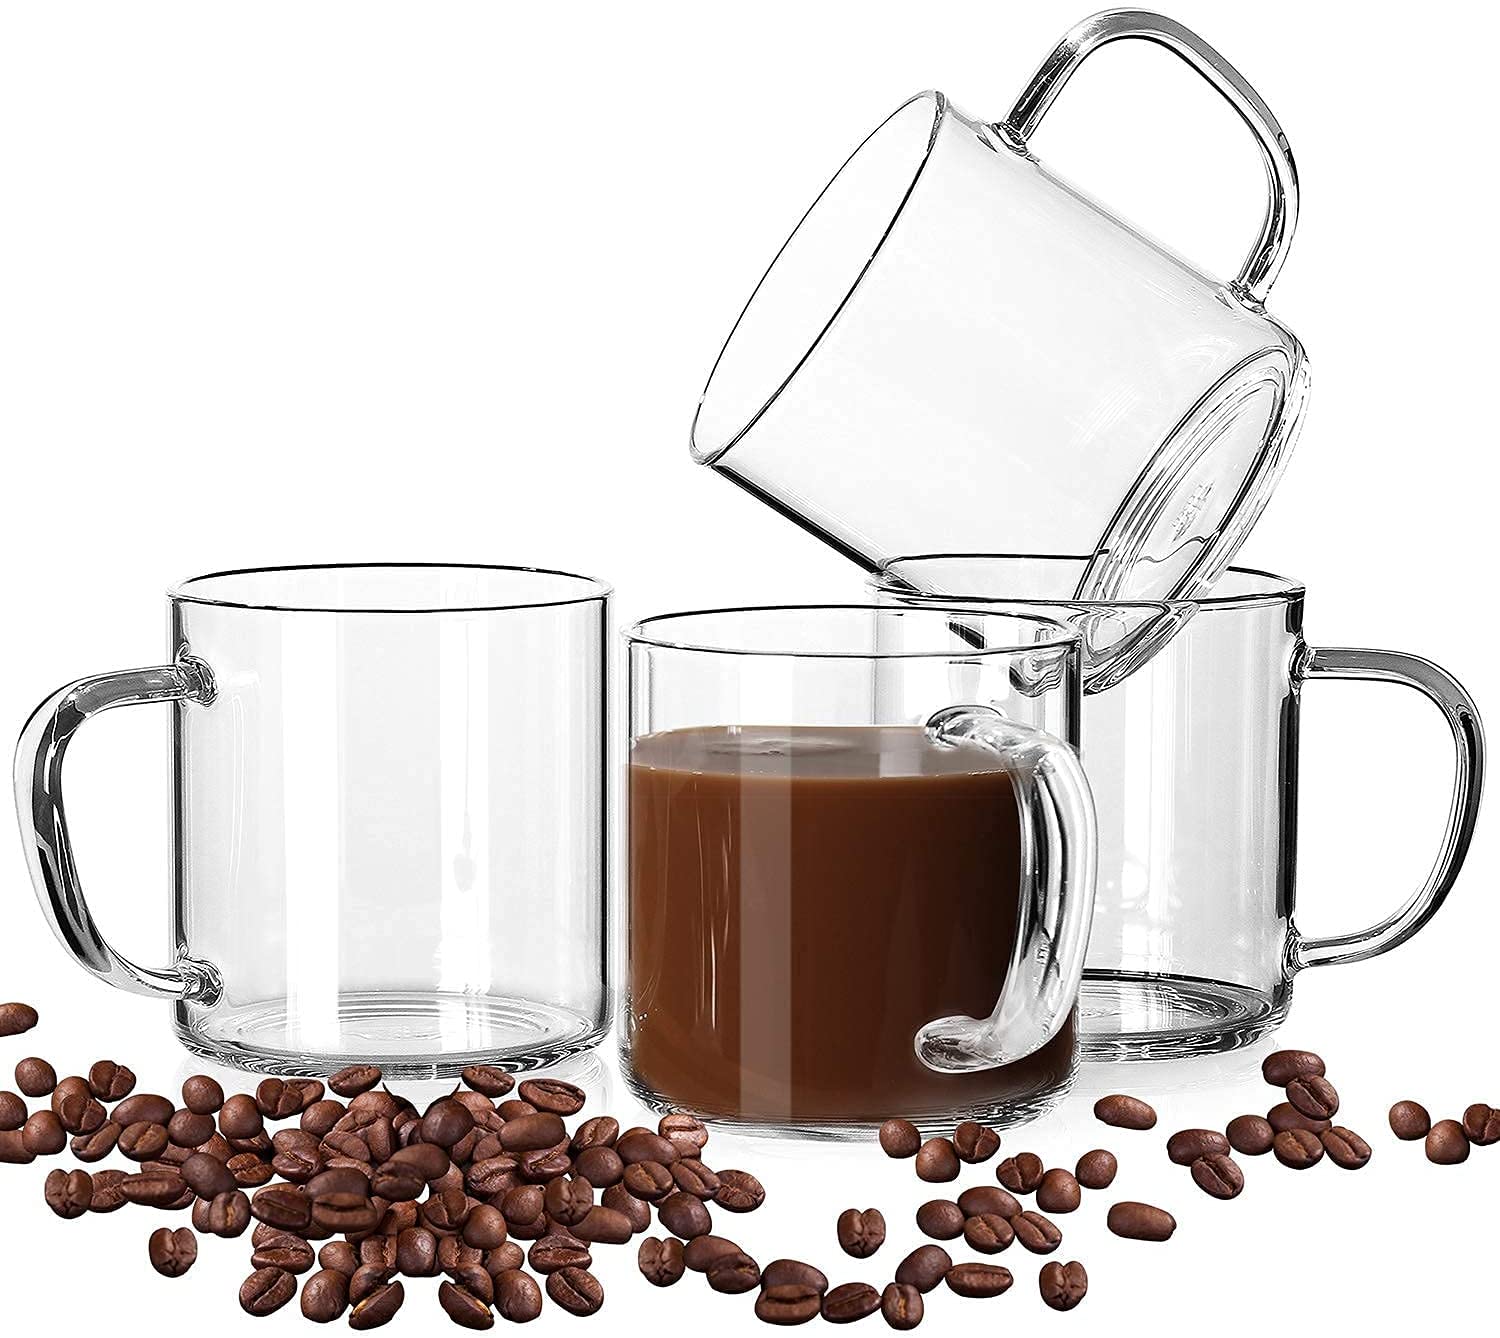 glass coffee mug full of coffee styled with empty glass mugs and coffee beans